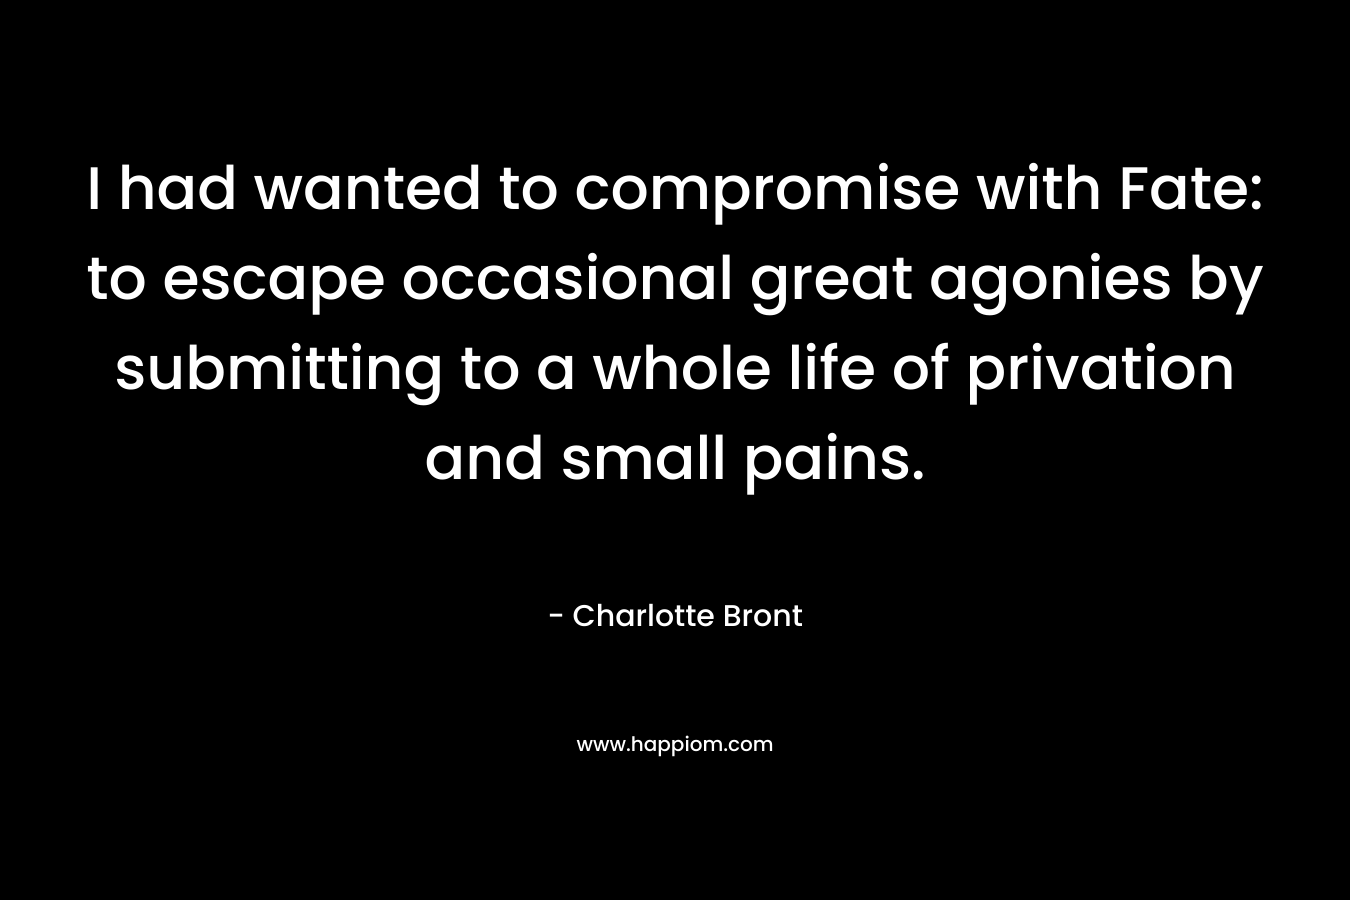 I had wanted to compromise with Fate: to escape occasional great agonies by submitting to a whole life of privation and small pains. – Charlotte Bront